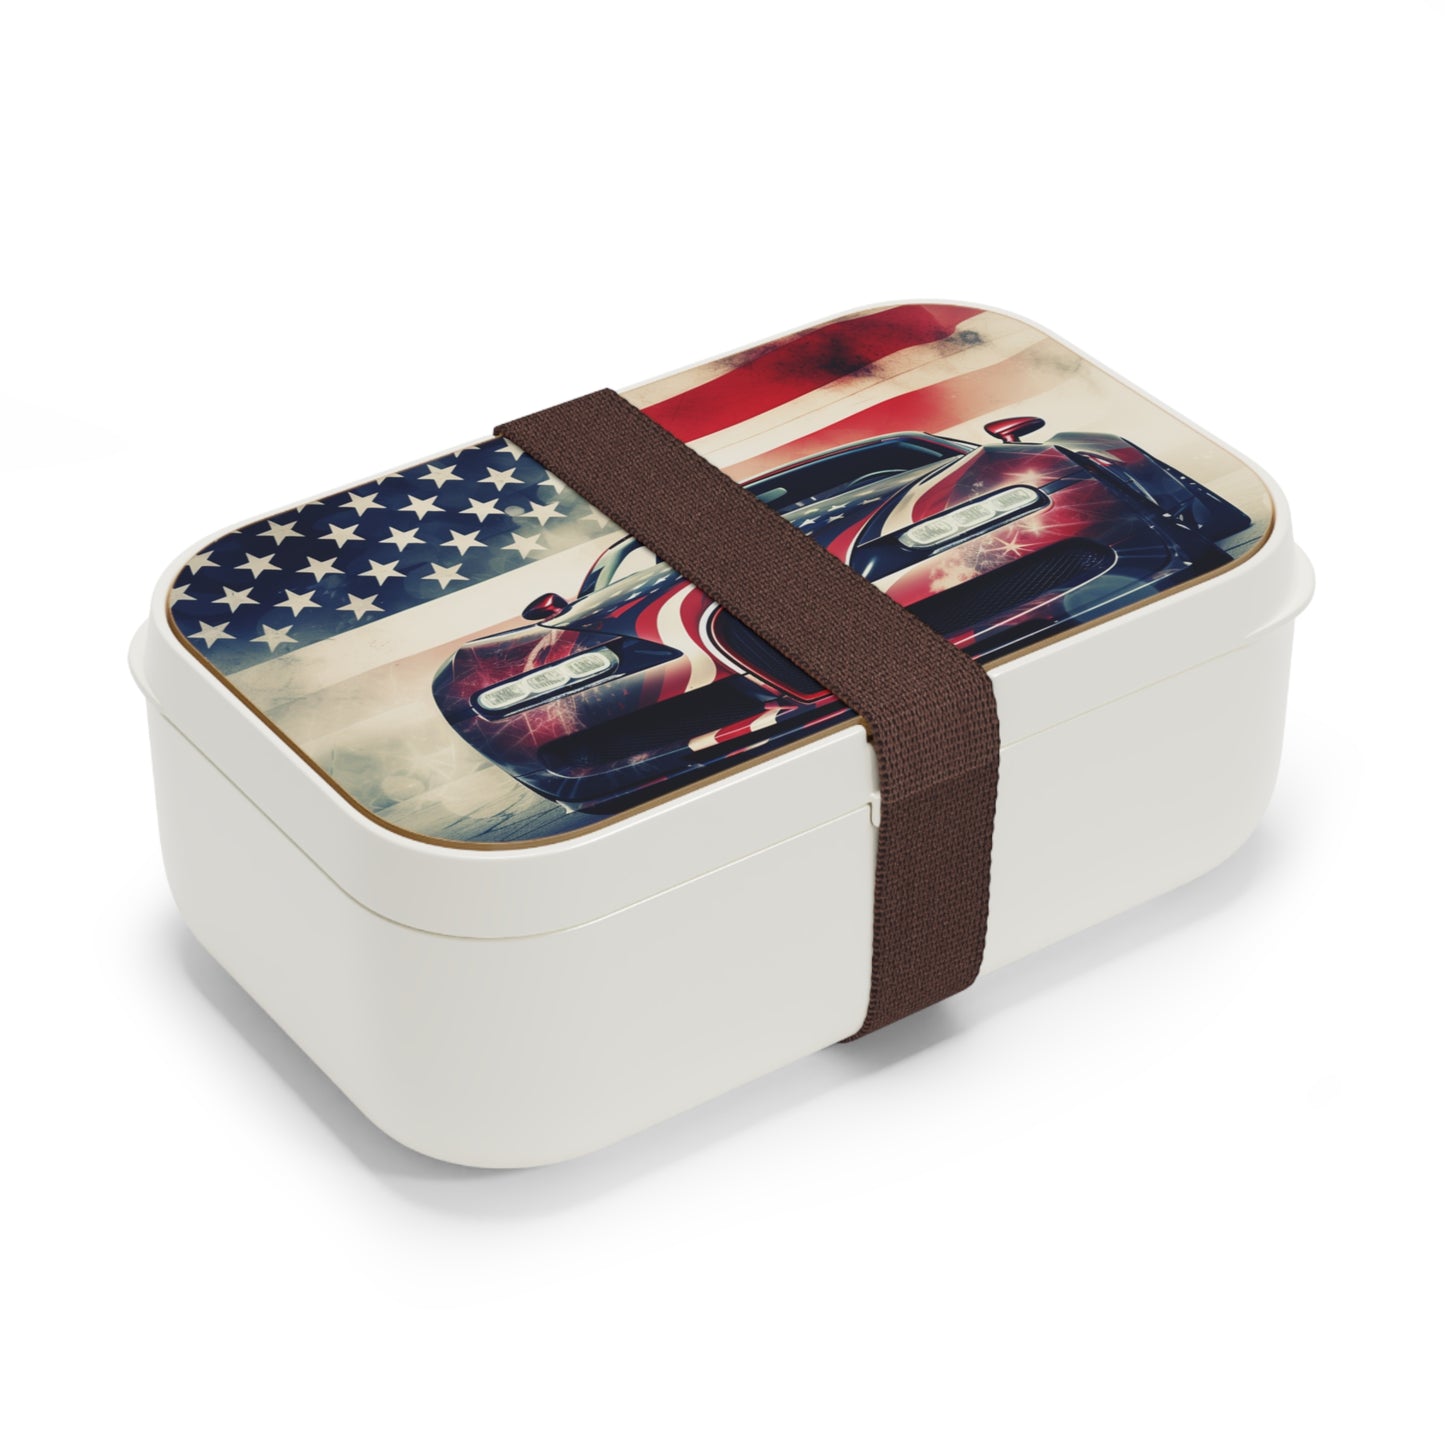 Bento Lunch Box Abstract American Flag Background Bugatti 1